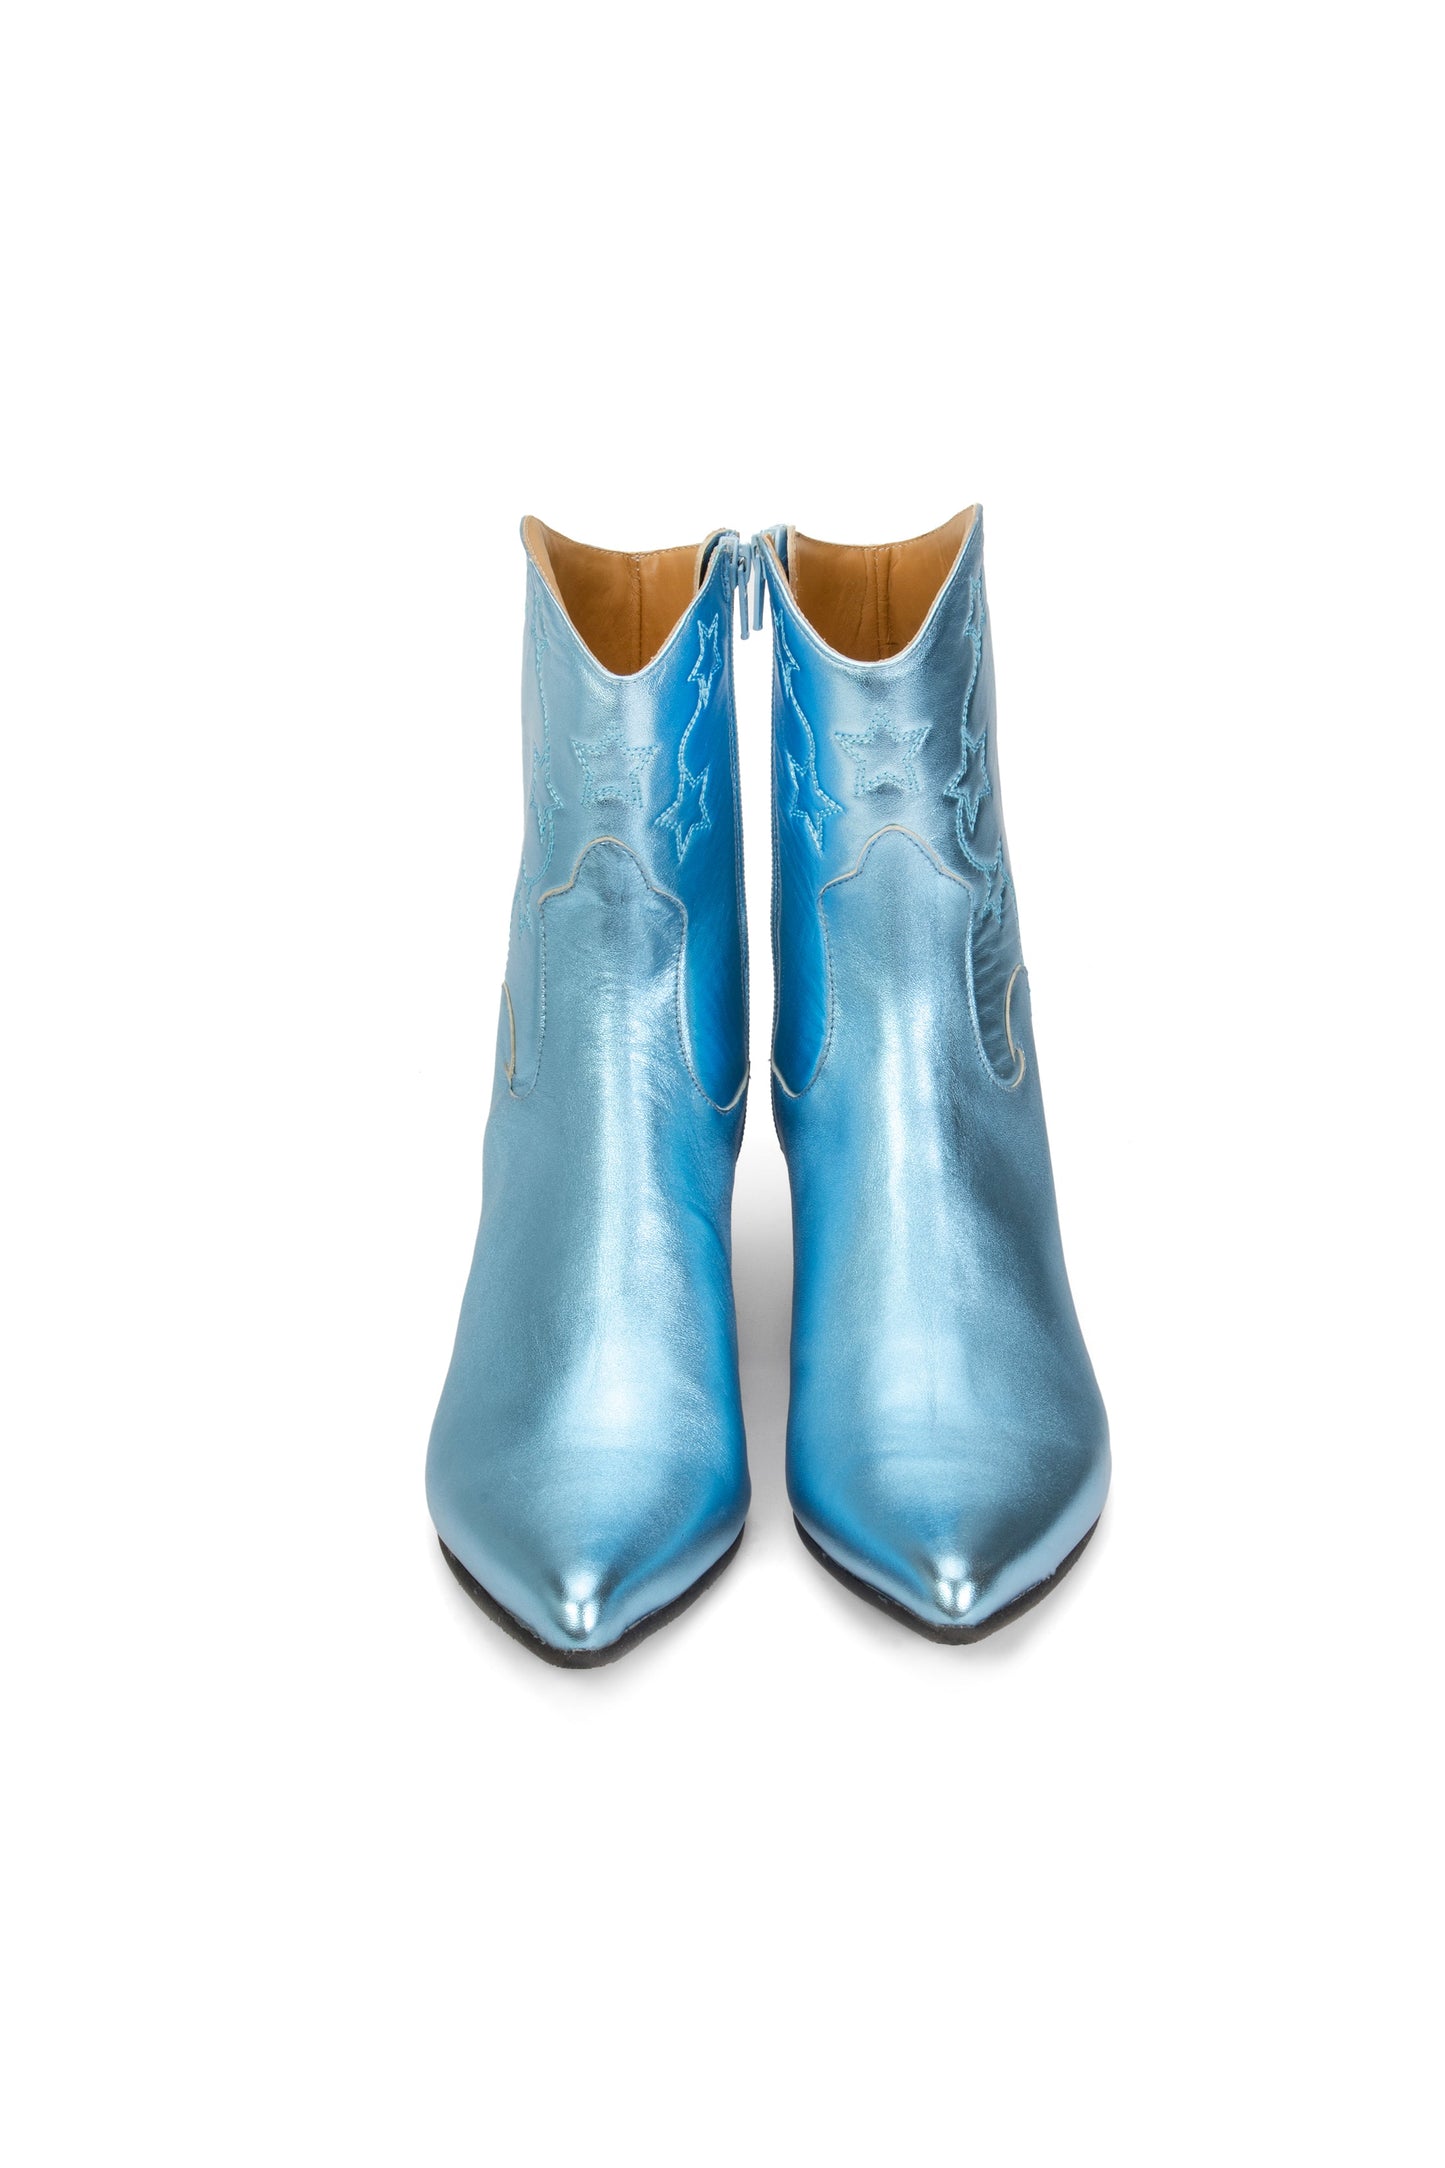 Metallic blue Carefully stitched and crafted boots with the same pattern on the ankles and front part